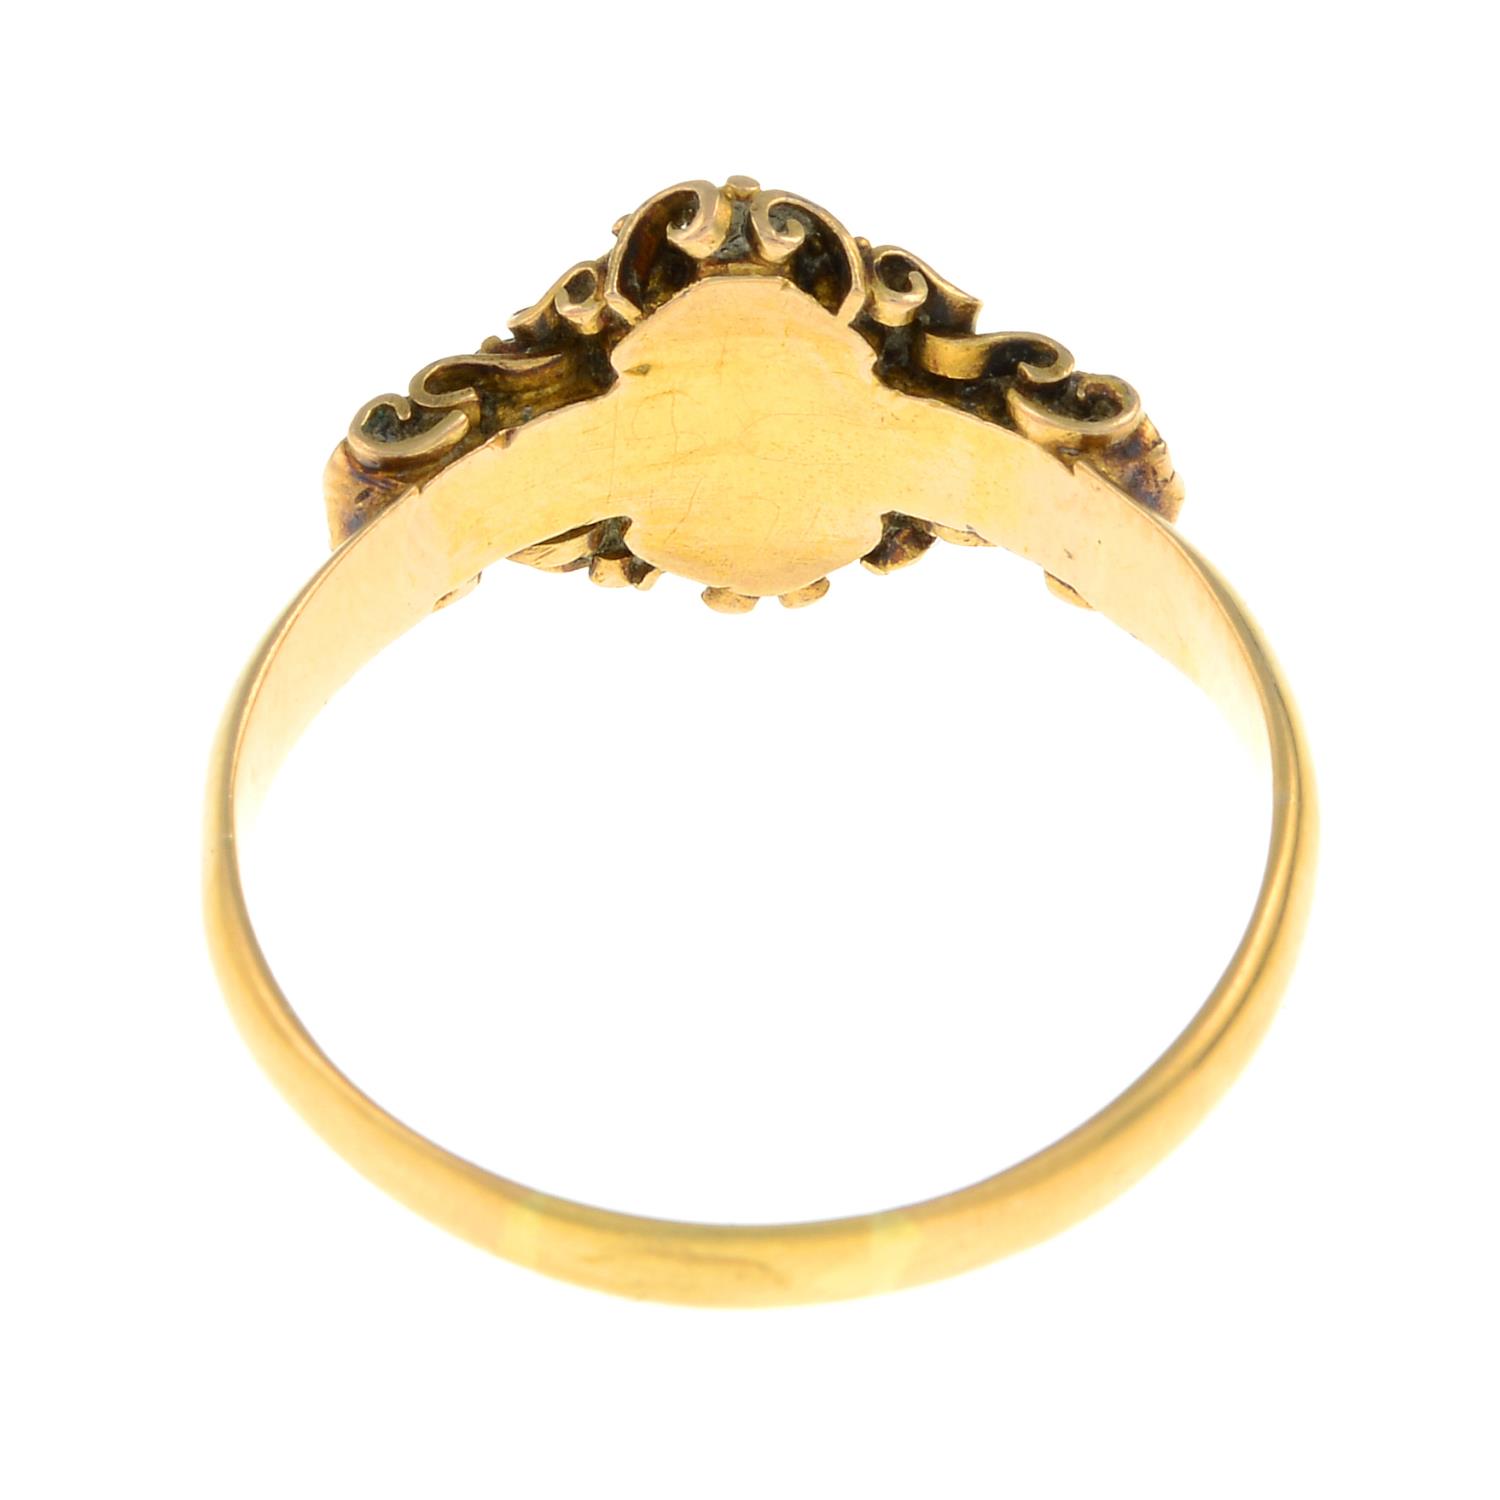 A mid 19th century 18ct gold emerald and split pearl ring.Hallmarks for Birmingham, 1867. - Image 3 of 3